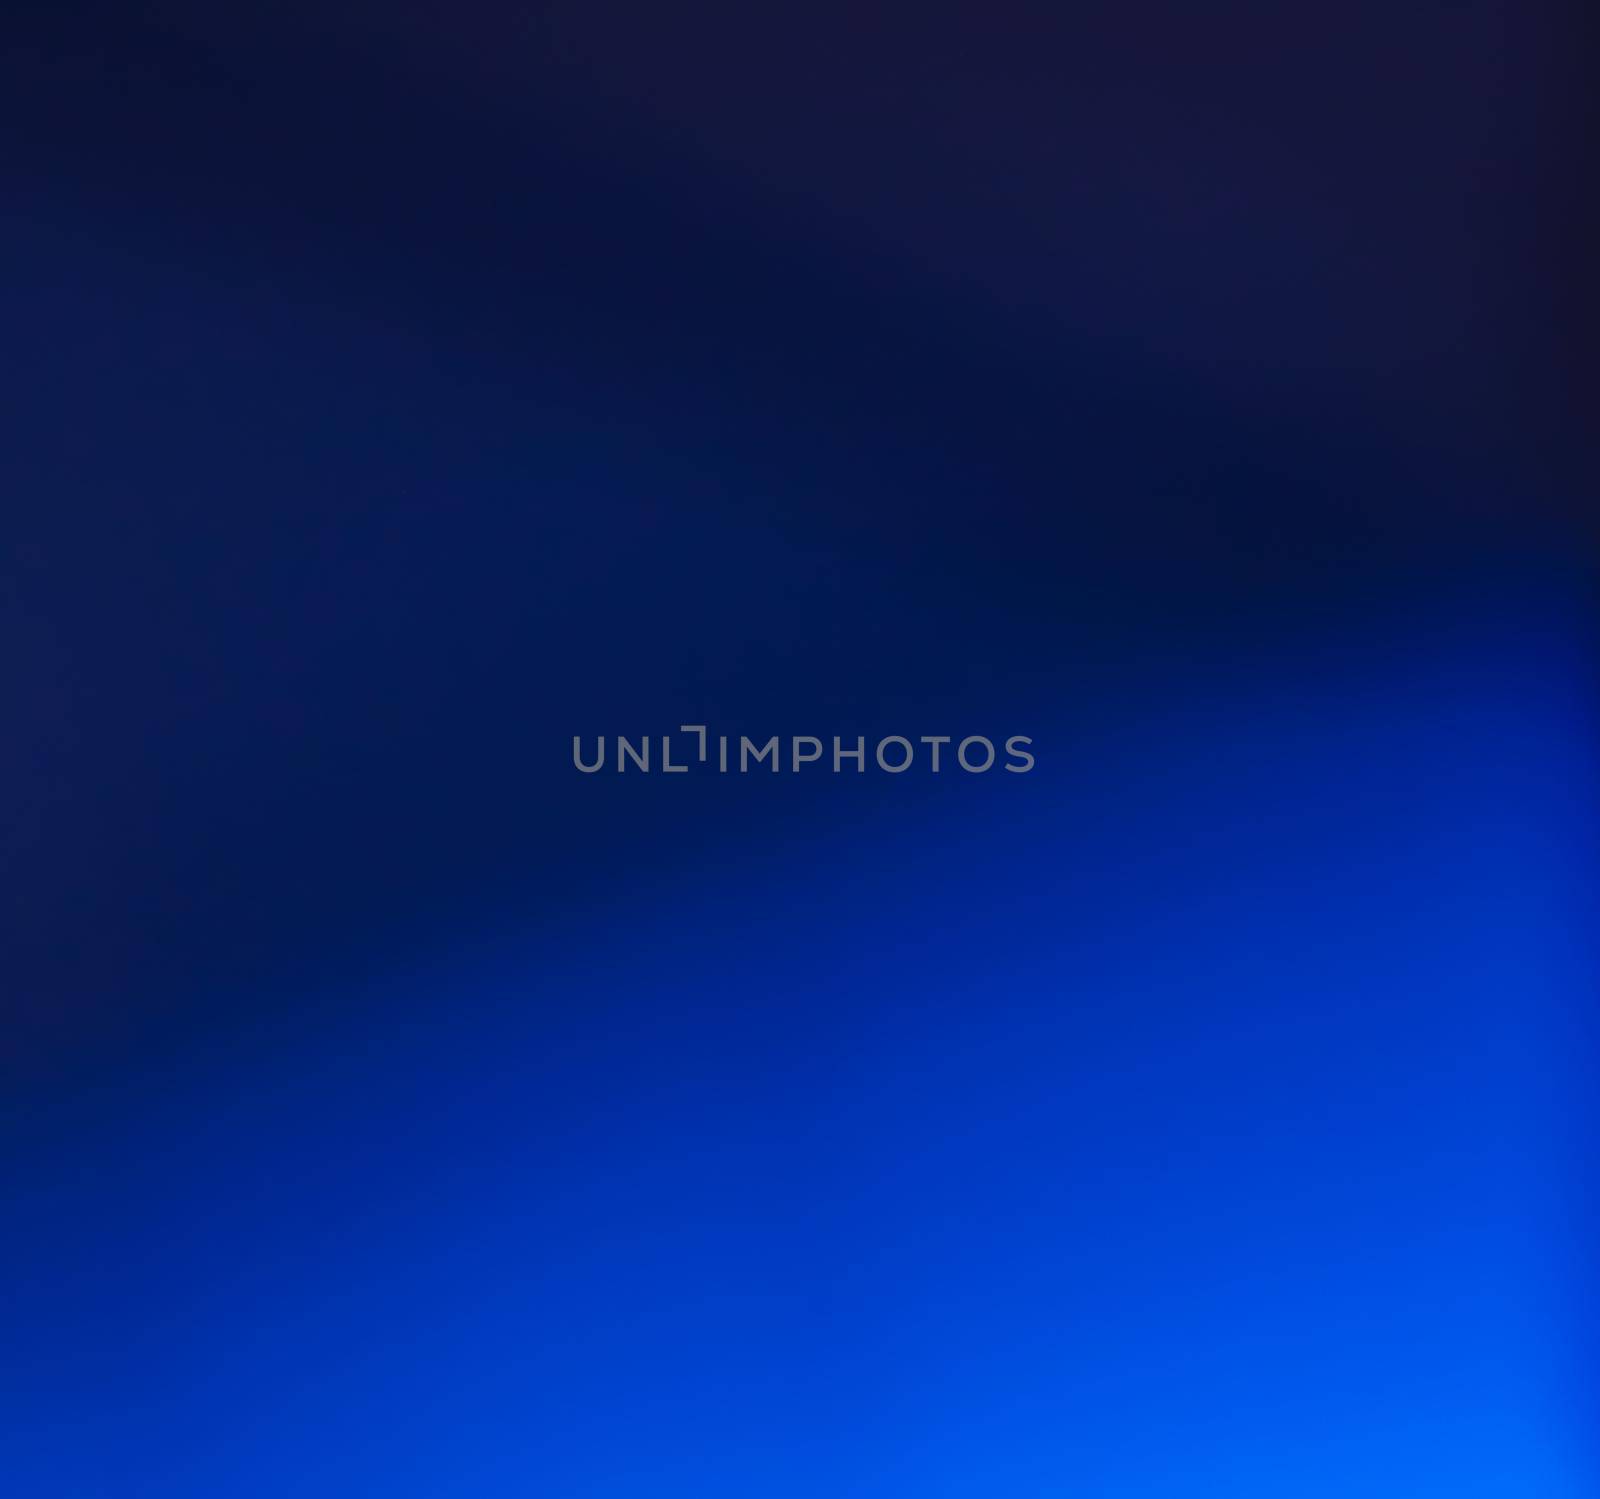 Abstract background, defocused textures and modern design concept - Evening city lights in motion